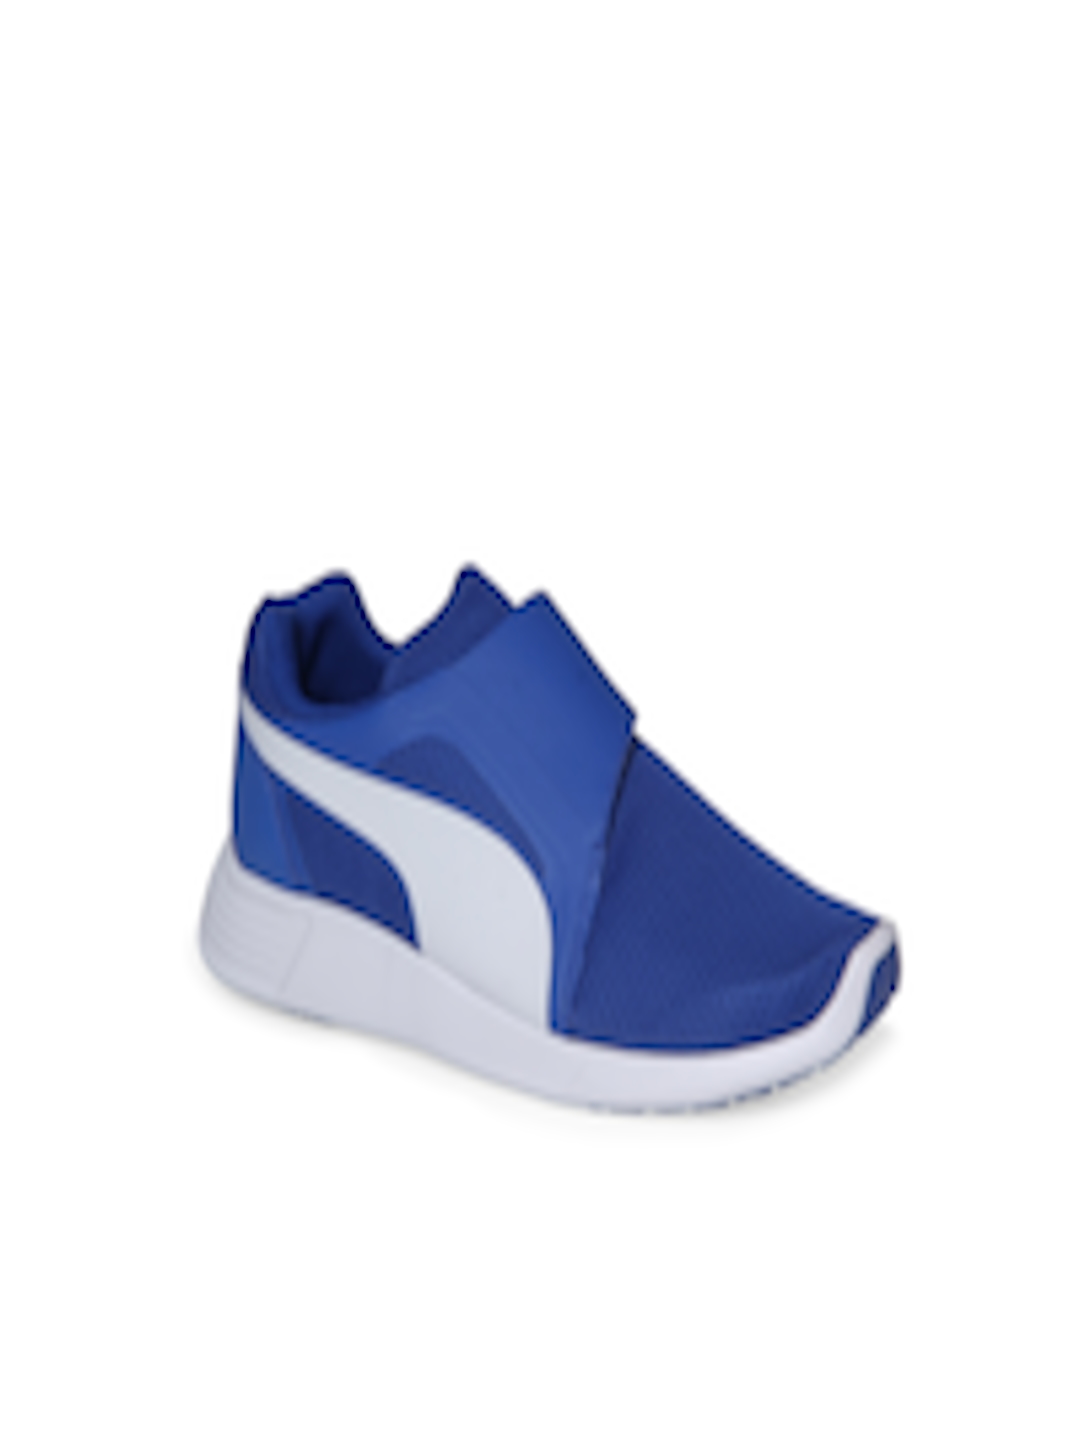 Buy Puma Unisex Blue Sneakers - Casual Shoes for Unisex Kids 2454426 ...